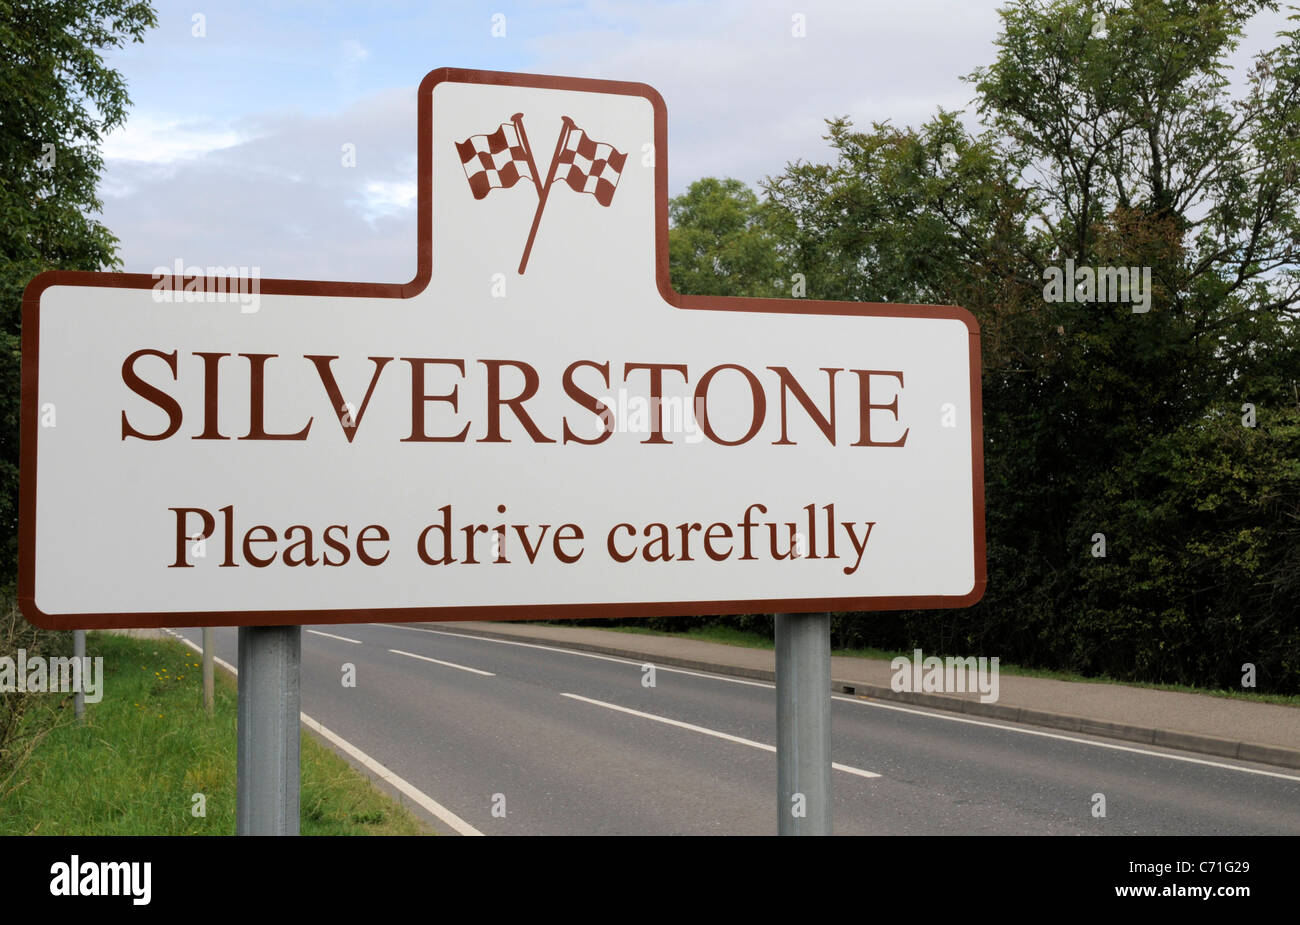 Silverstone Road Sign Banque D'Images